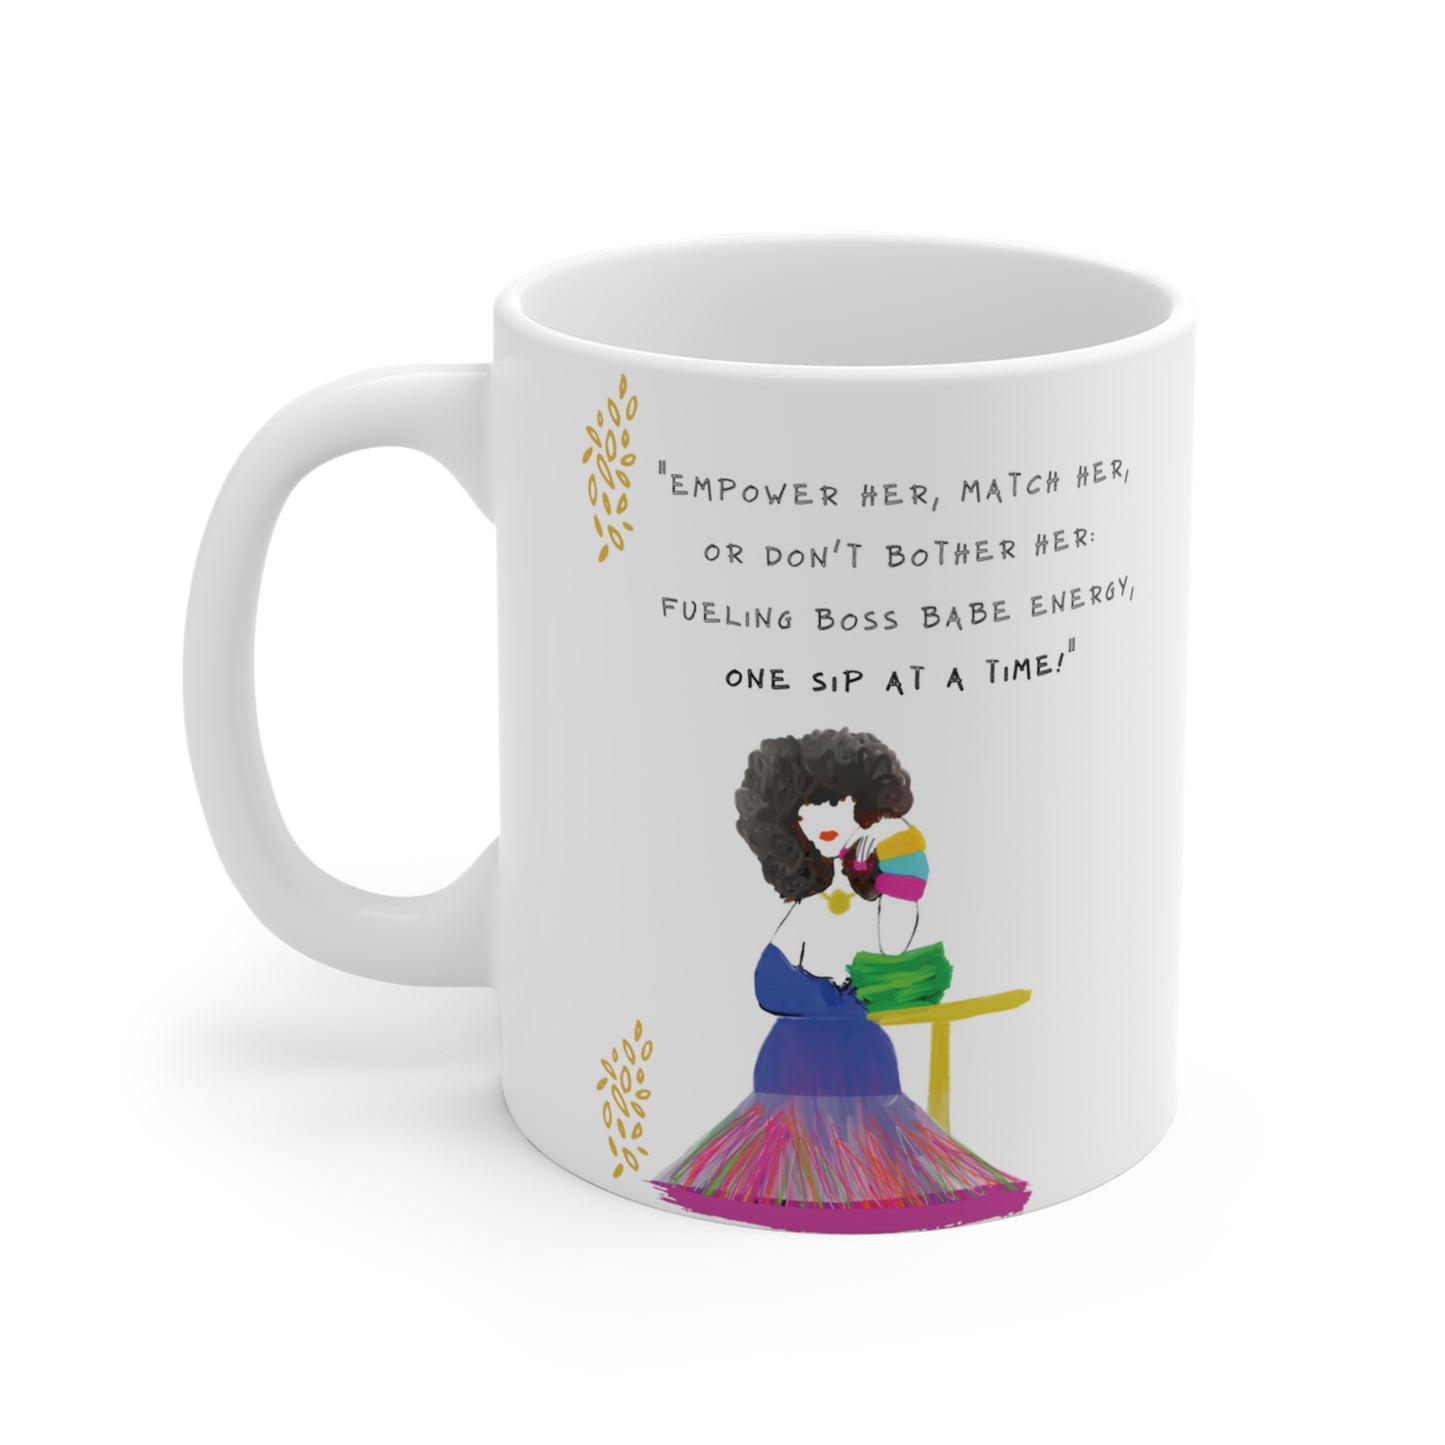 'Empower Her, Match Her, or Don't Bother Her' coffee mug.